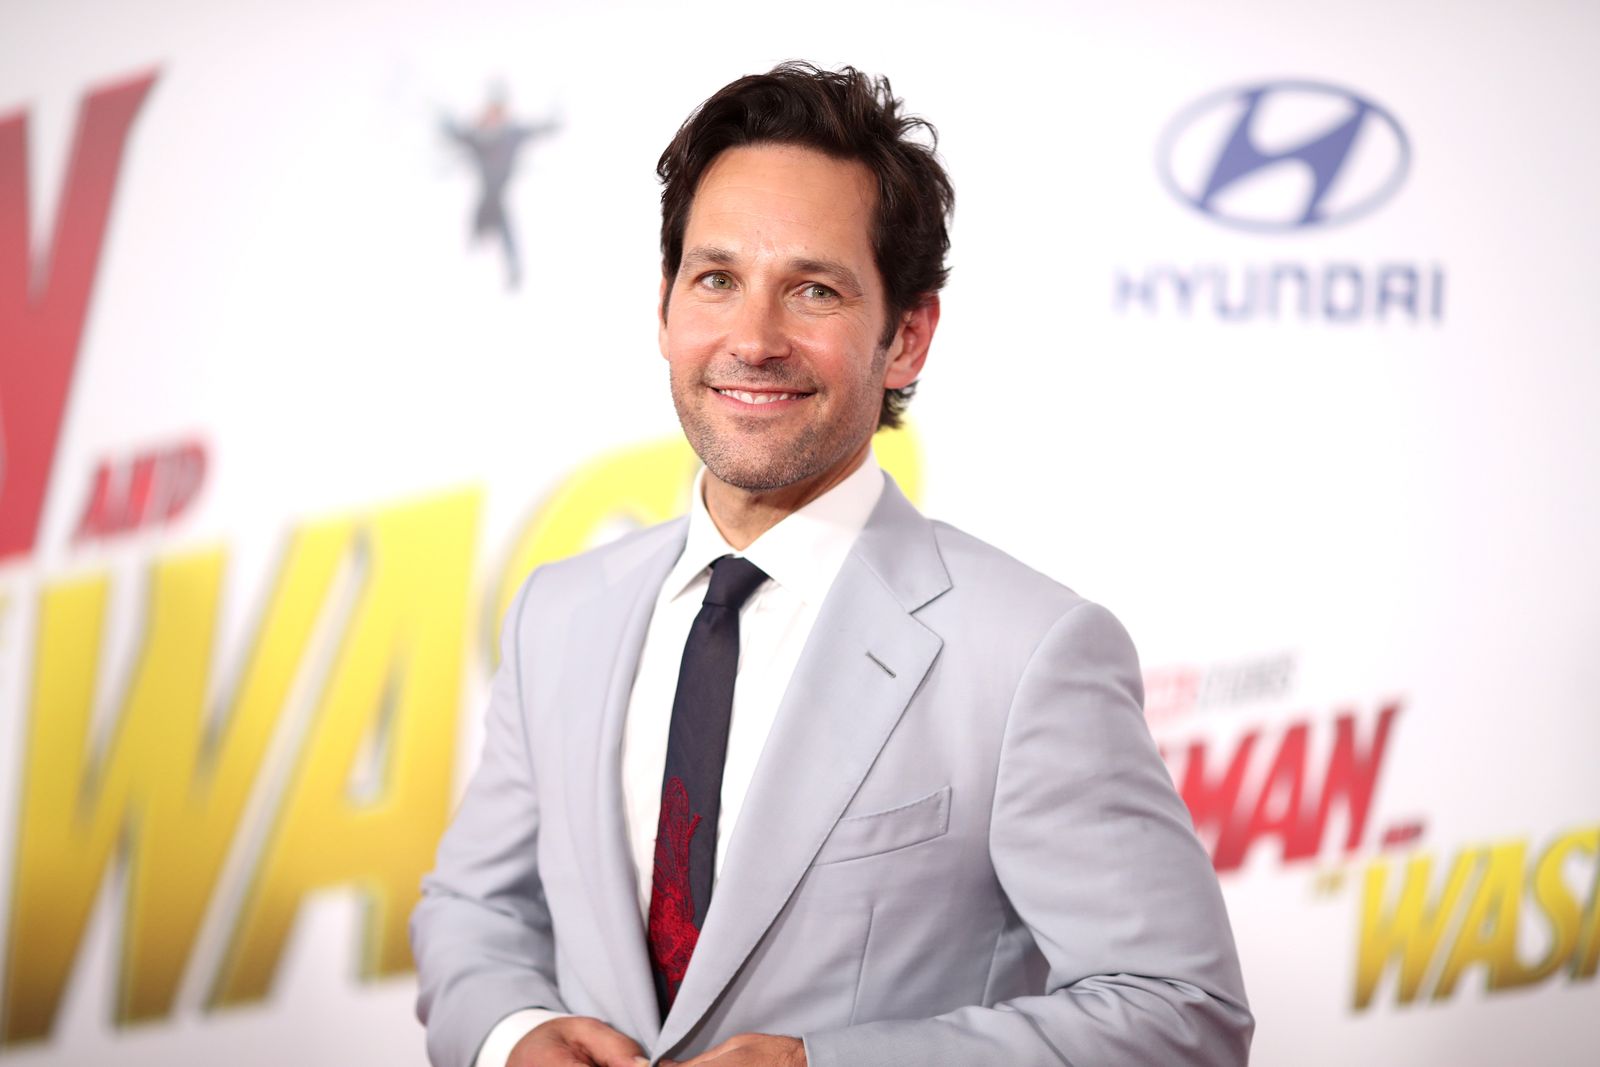 Paul Rudd attends the premiere of Disney And Marvel's "Ant-Man And The Wasp" on June 25, 2018